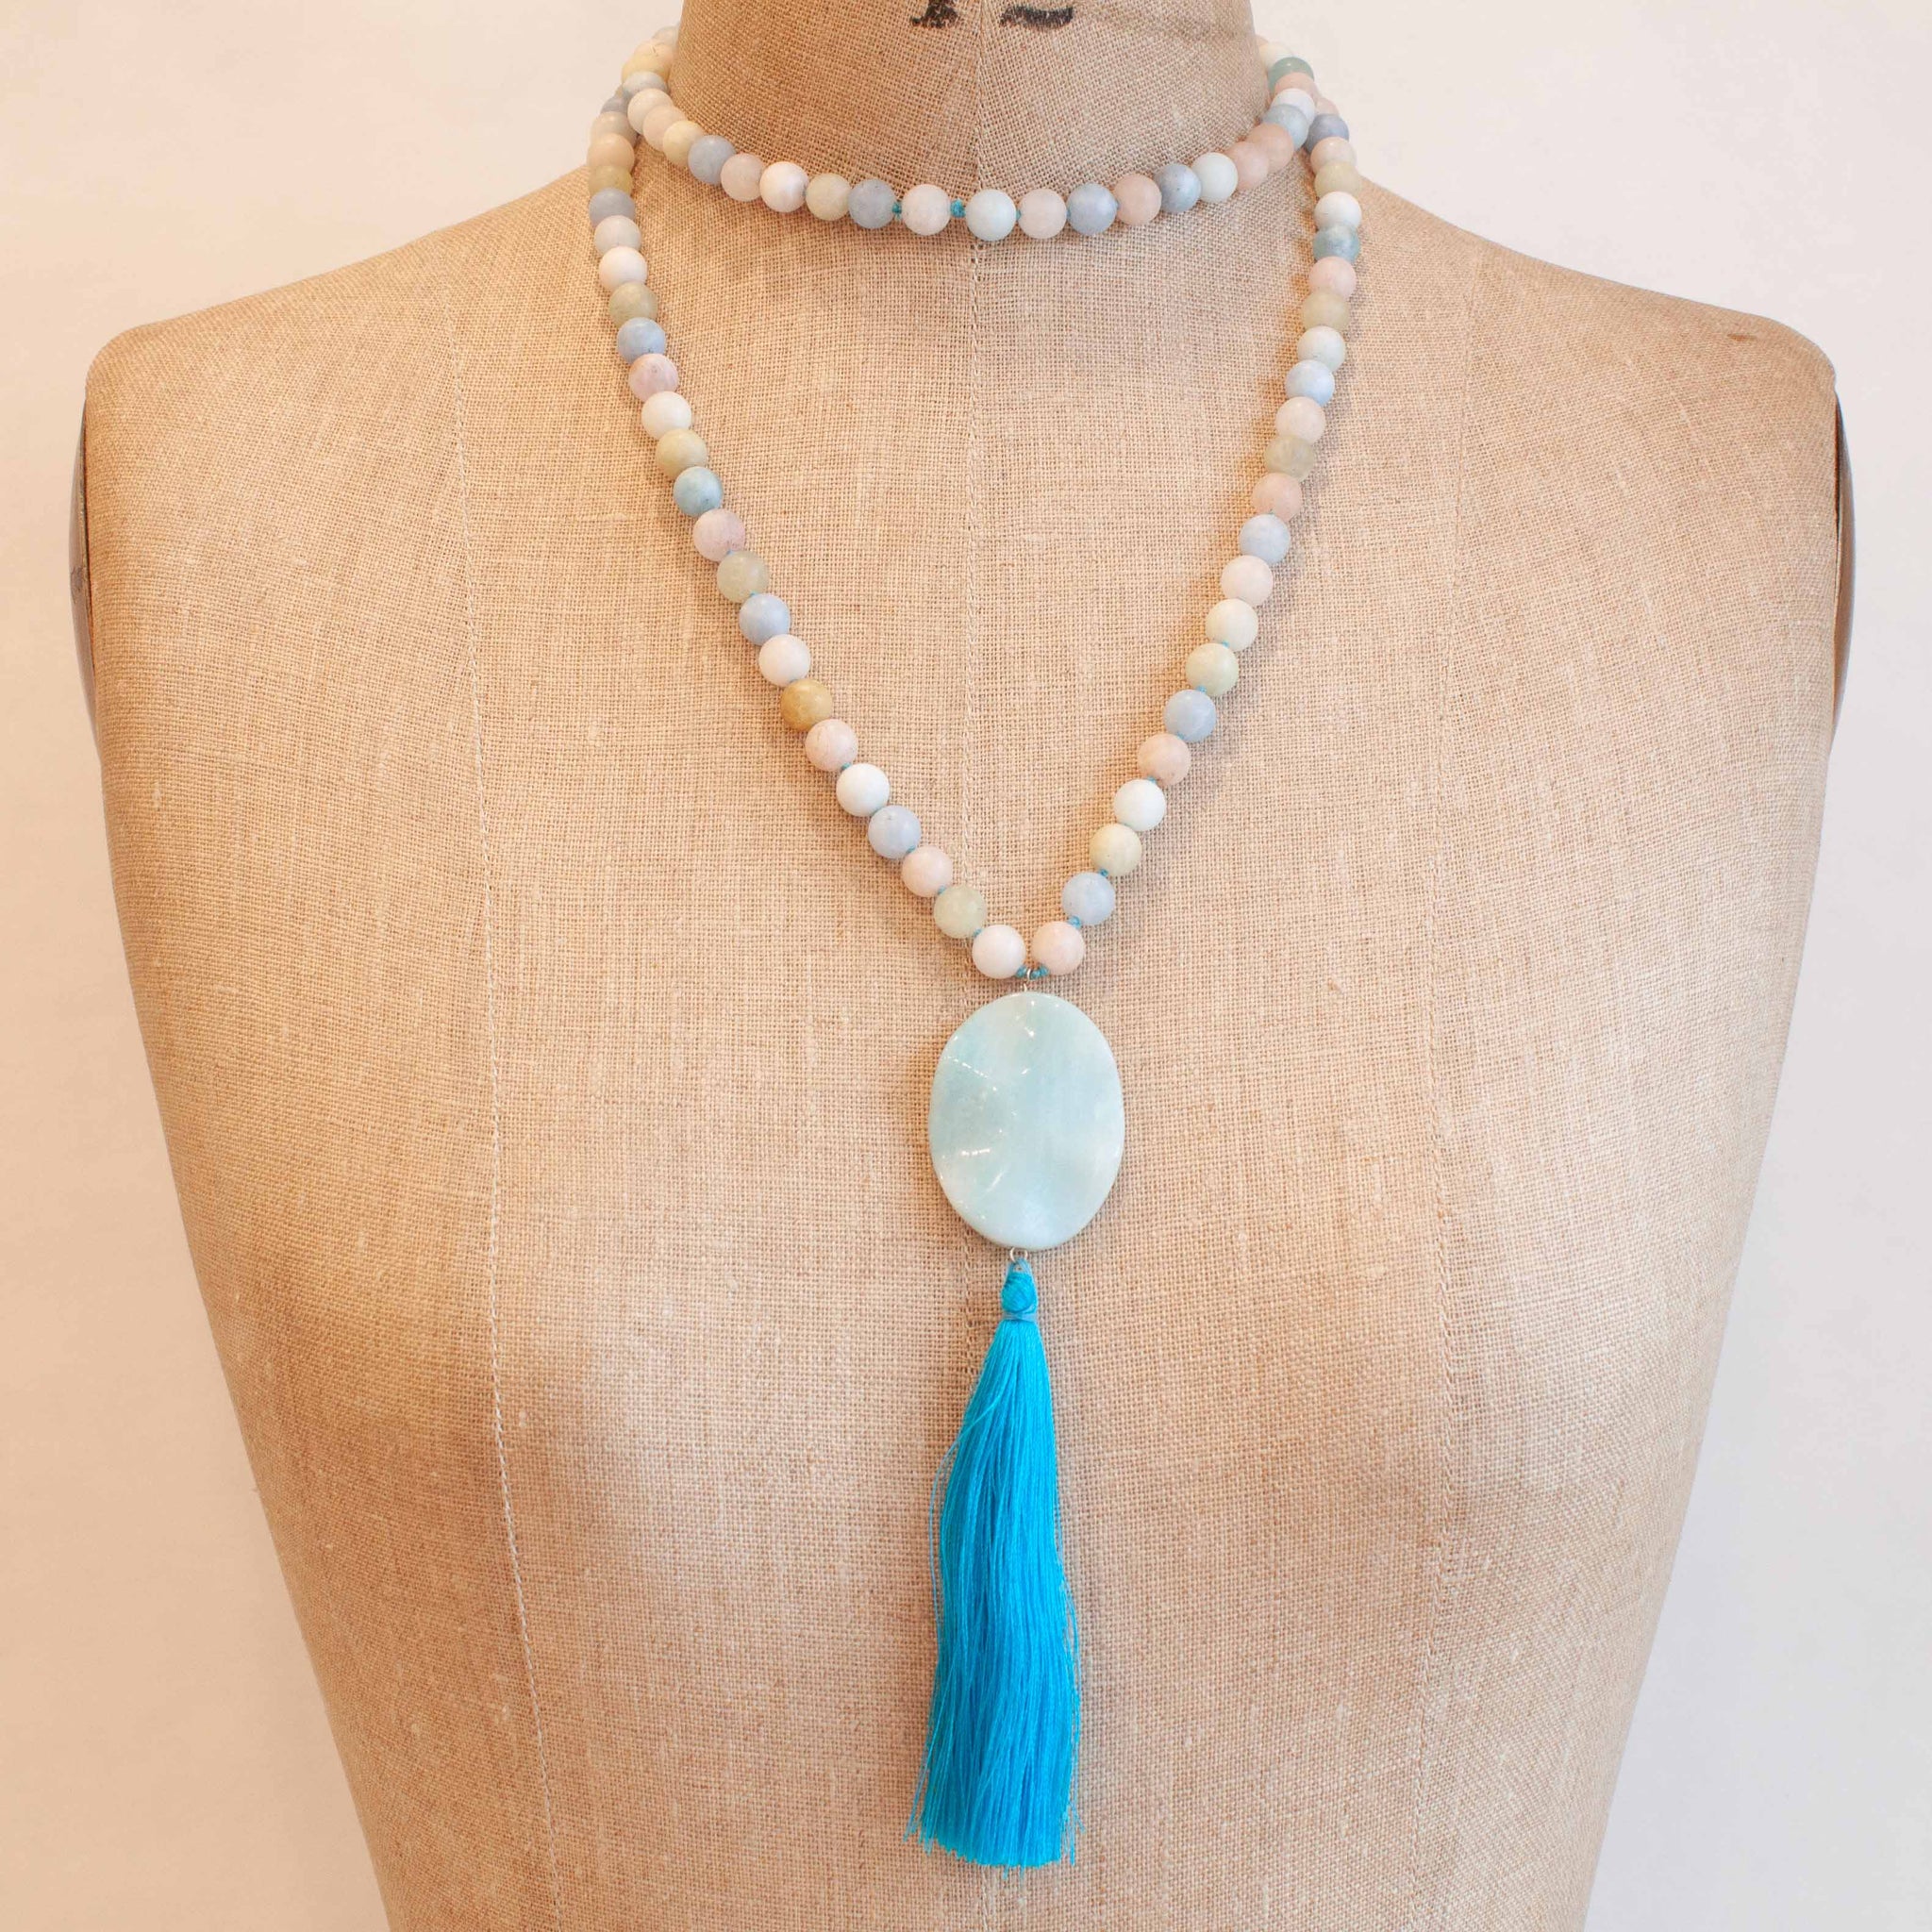 Our loving mala was hand knotted in our Toronto studio using morganite and aquamarine. Wear it to bring healing and compassion into your life; also a beautiful addition to your meditation practise. 40 inches long, 108 hand knotted morganite beads with aquamarine pendant and sky blue tassel. Handmade in Toronto kp jewelry co.